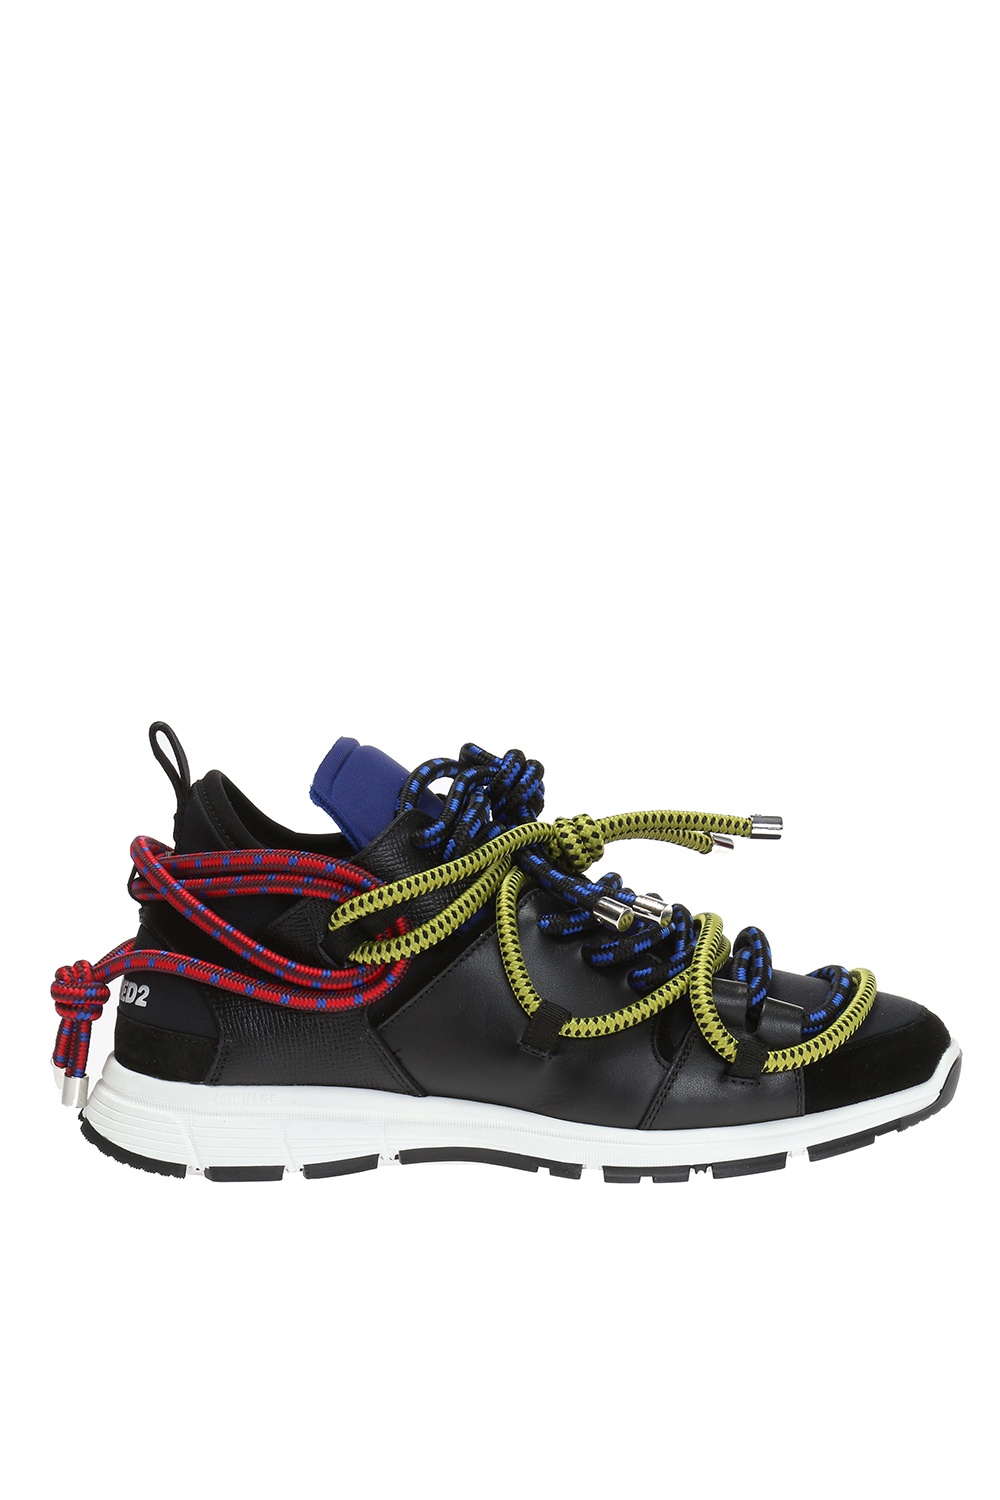 Bungy Jump' sneakers Dsquared2 - Vitkac 